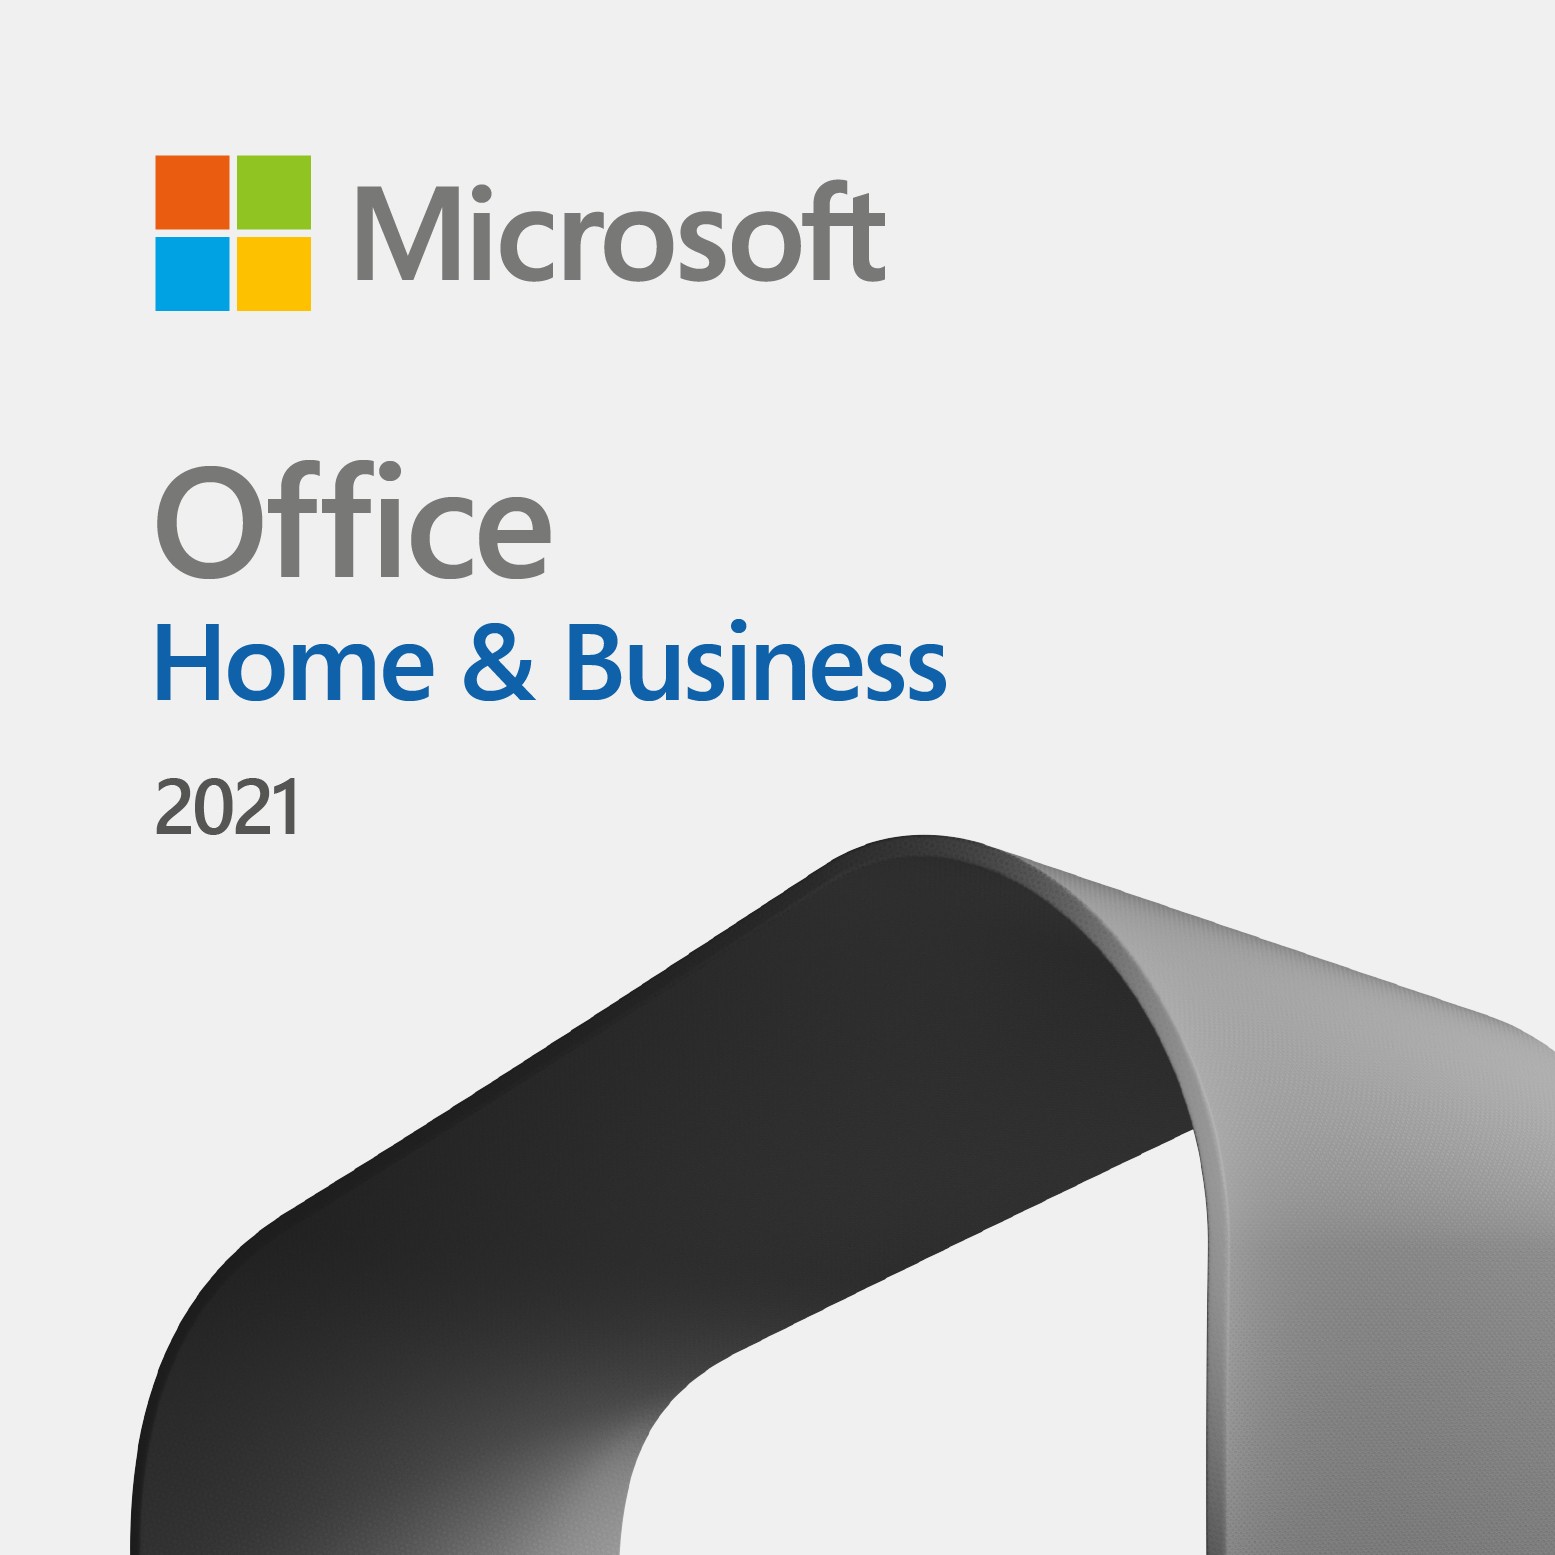 Microsoft Office Home & Business 2021 - 1 PC/MAC - ESD-DownloadESD